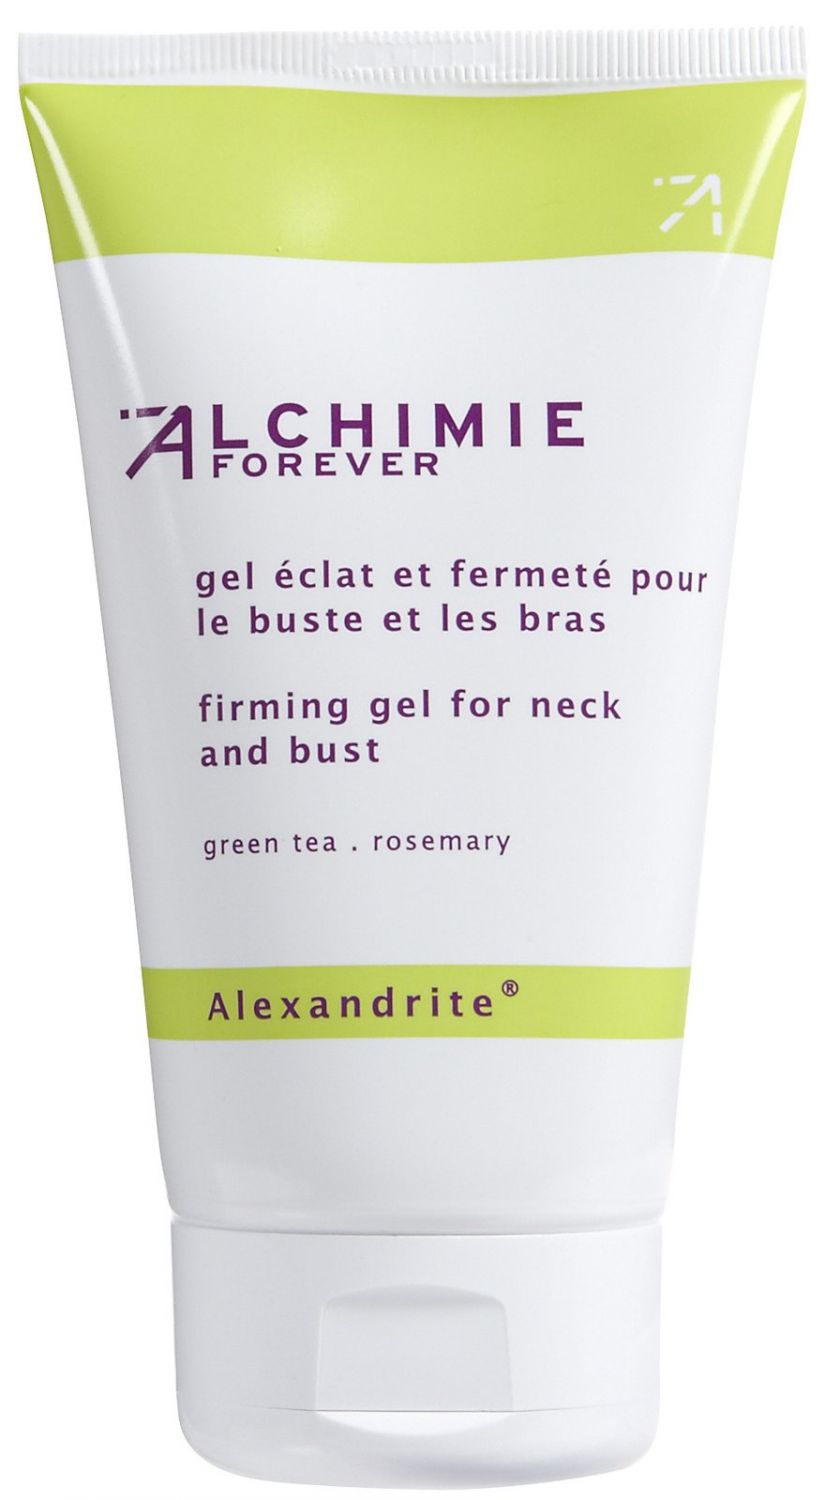 1 Alchimie Forever Firming Gel For Neck And Bust